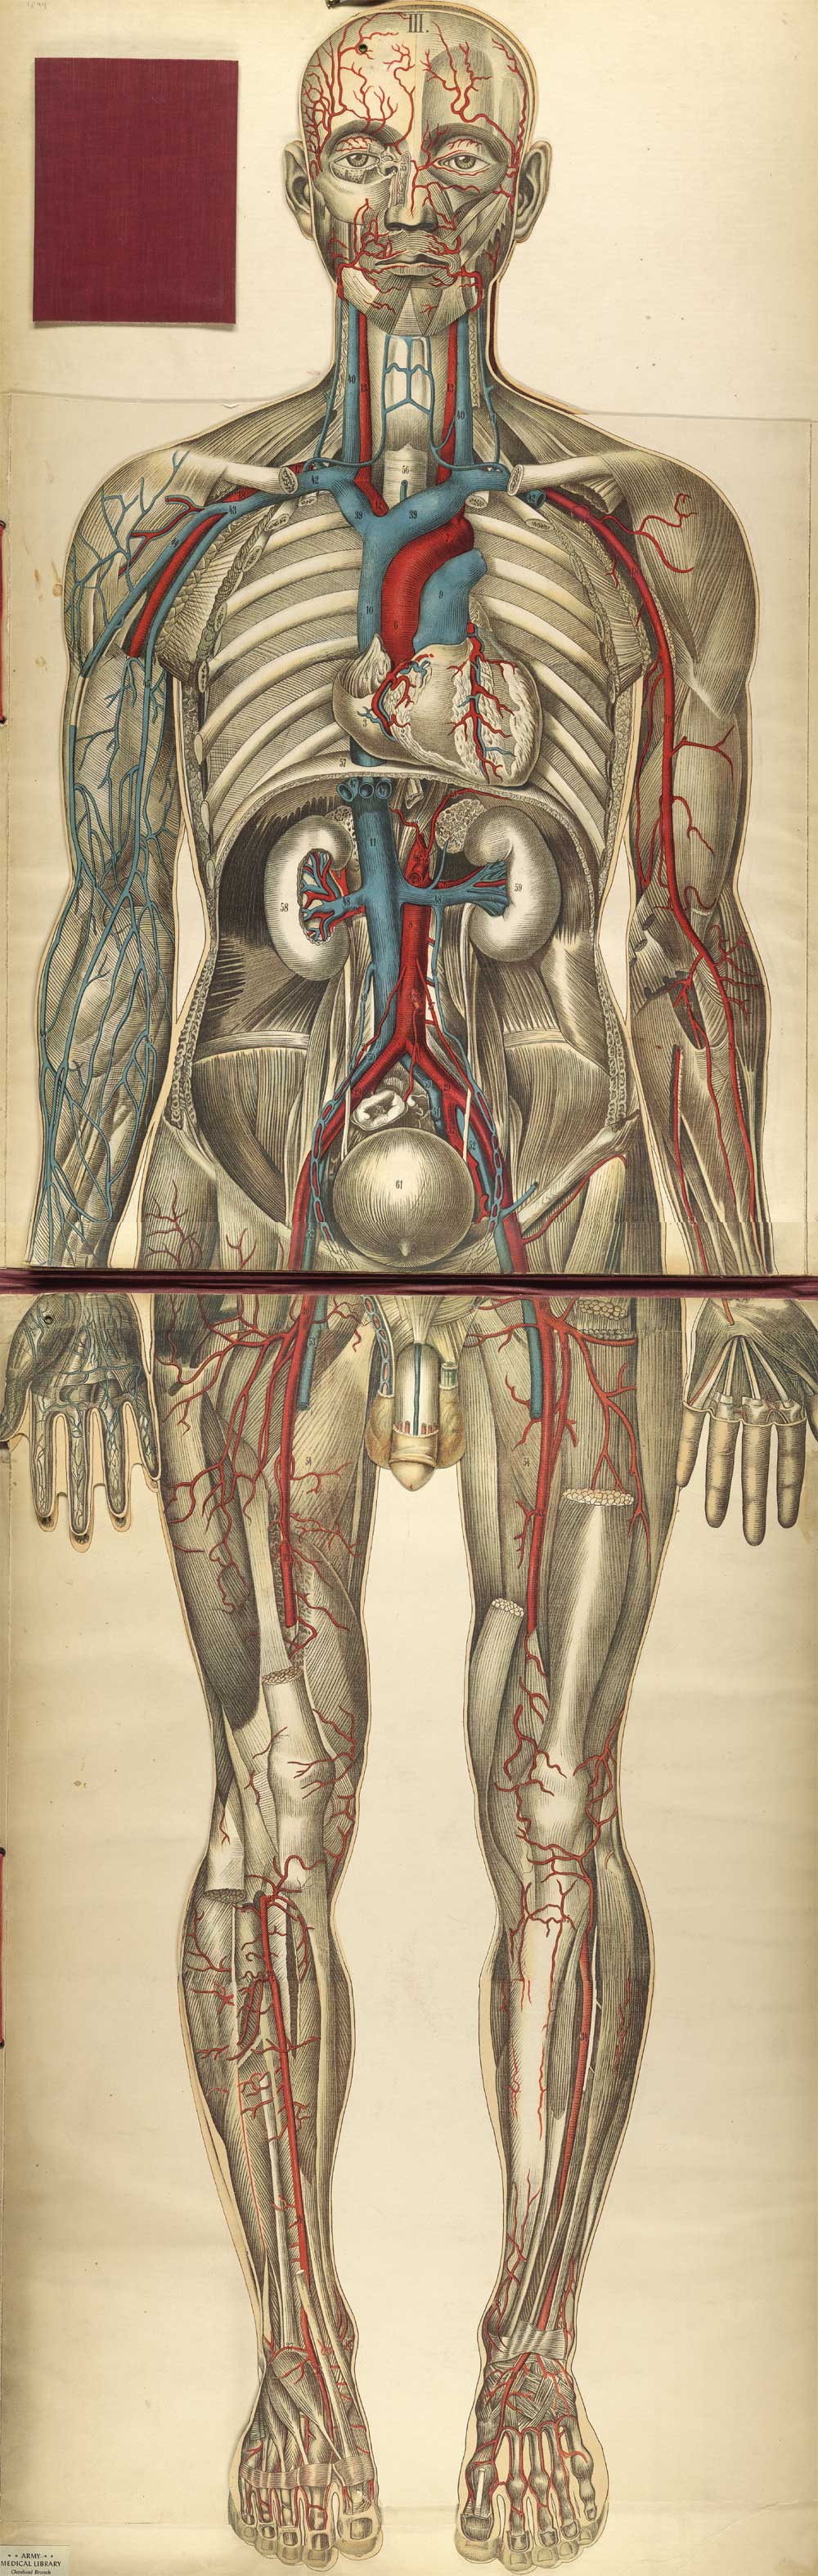 Chromolithograph showing the arterial and venous of the front of the human body, from Julien Bouglé’s Le corps humain en grandeur naturelle, NLM Call no. WE B758c 1899.